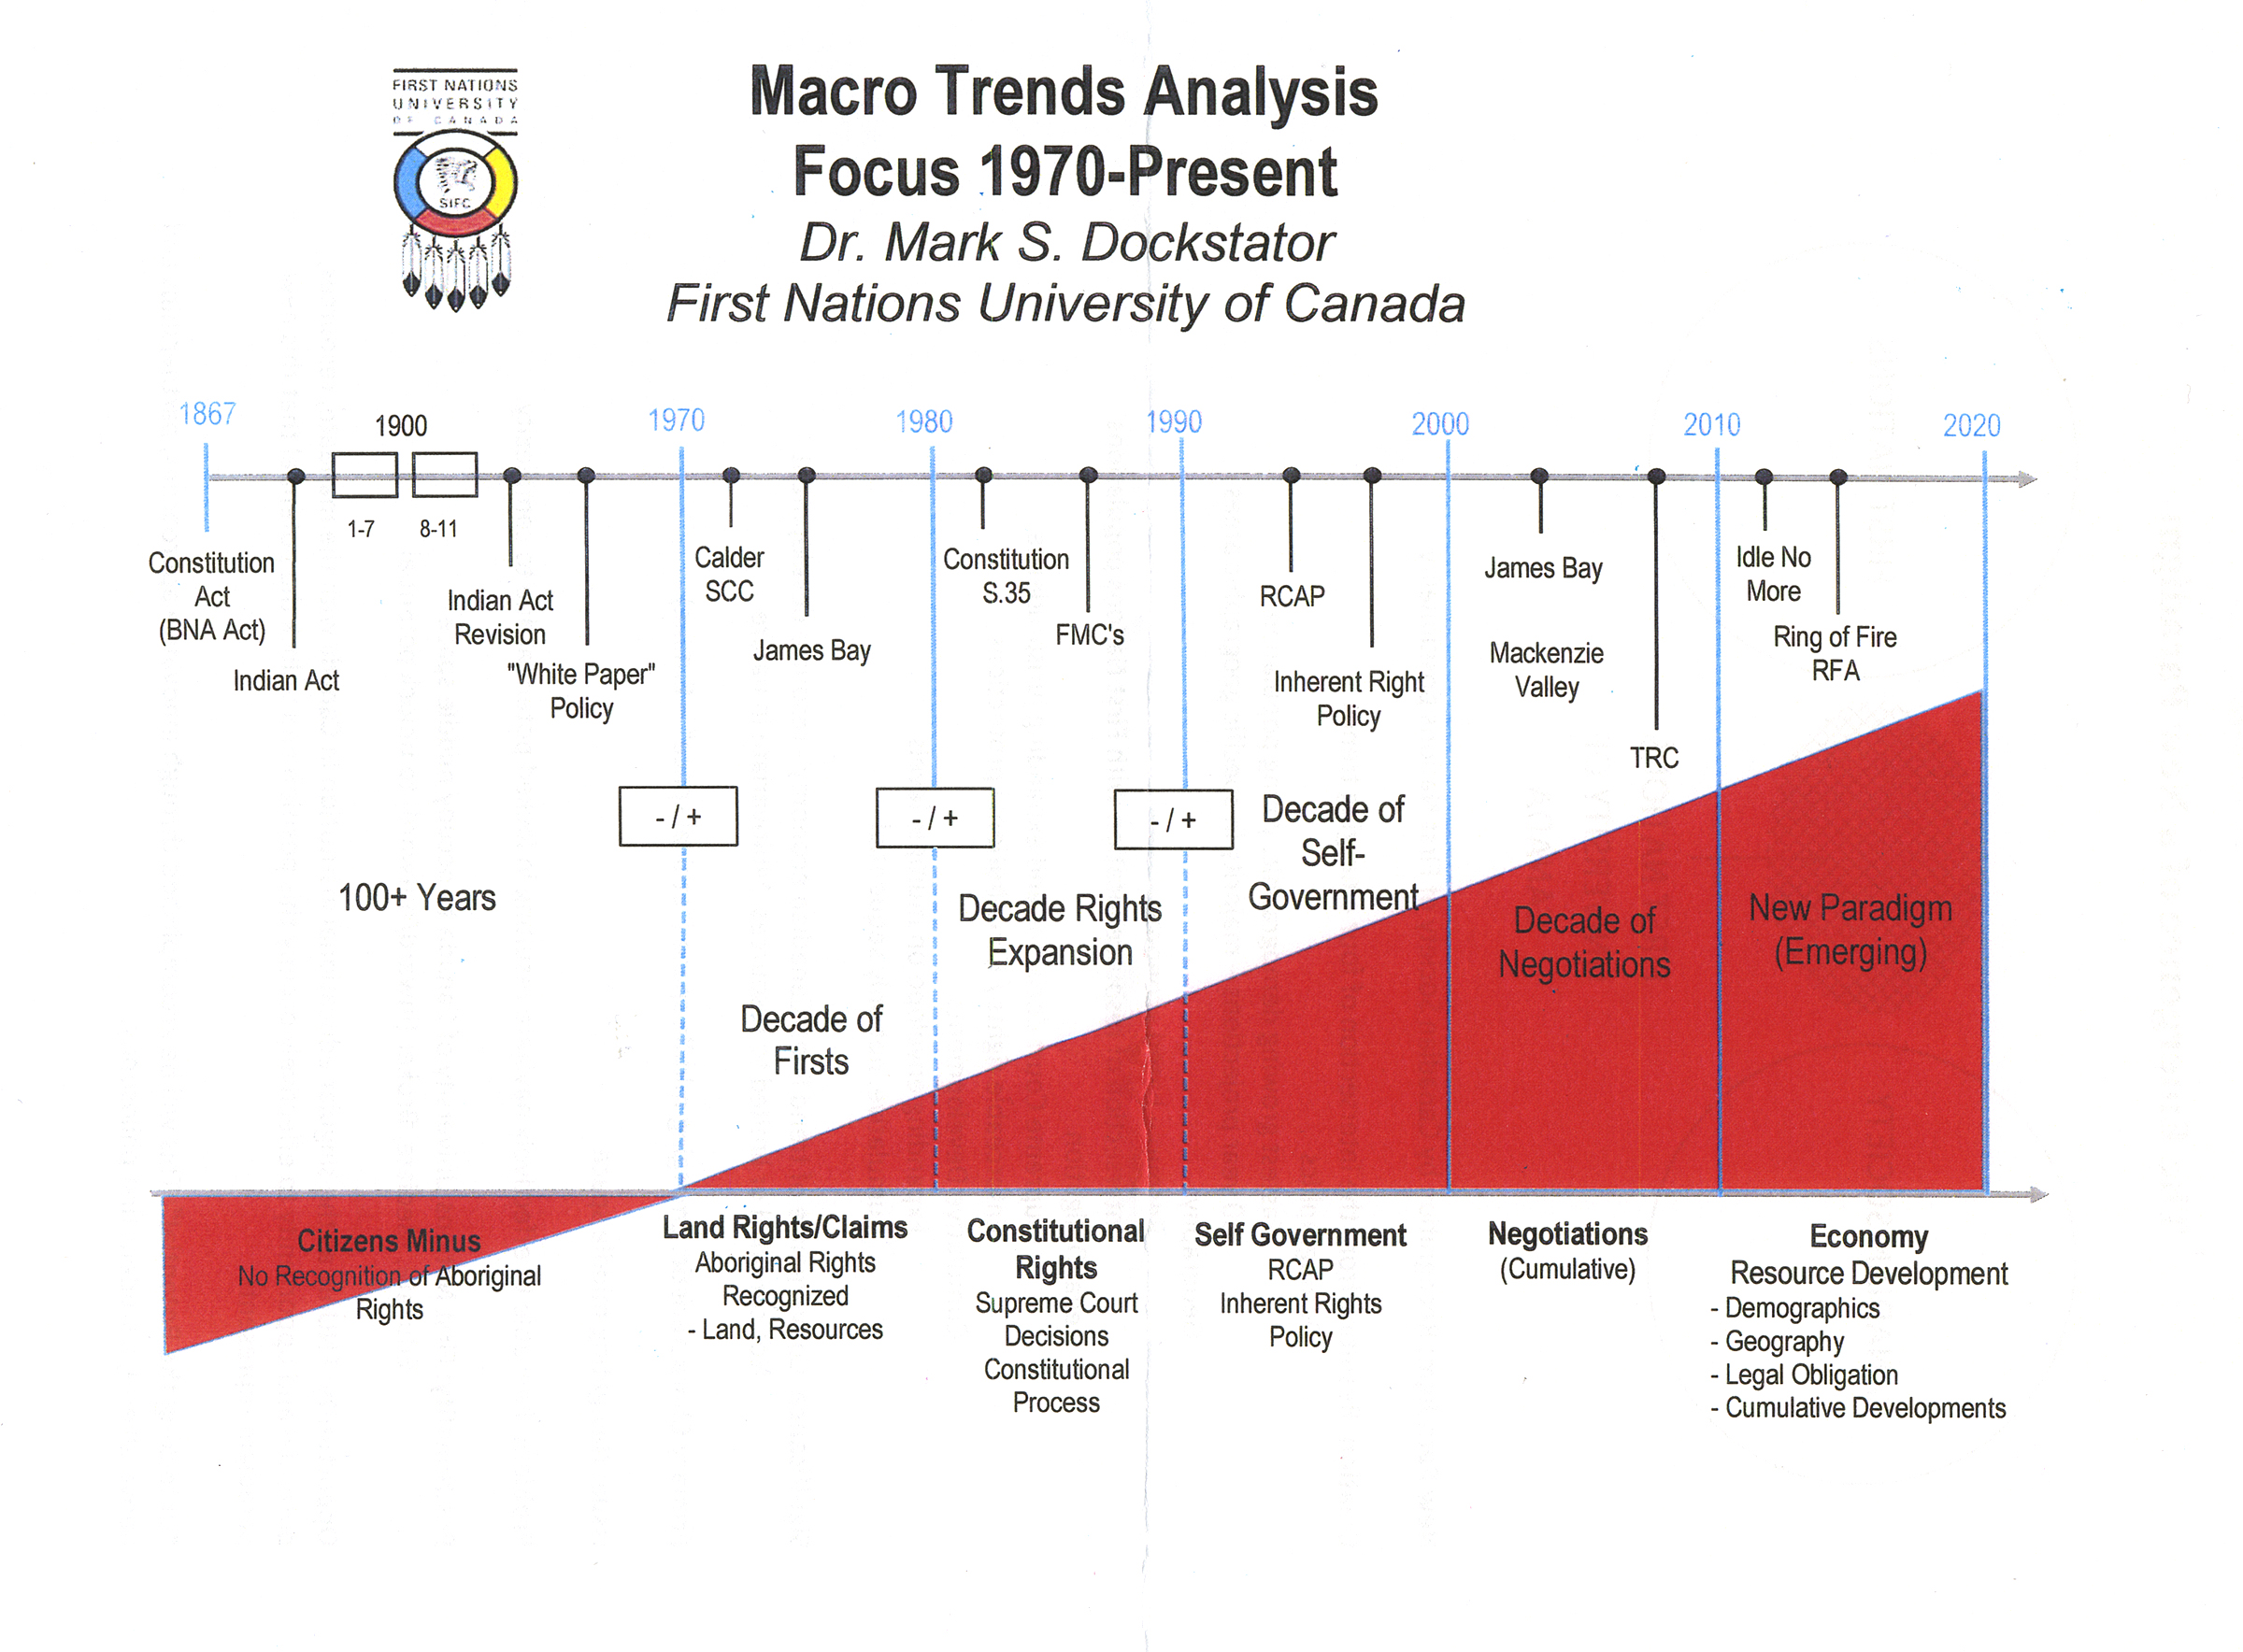 Dr. Dockstator created this chart to illustrate how the relationship between First Nations people and Canadian society has evolved over the years.